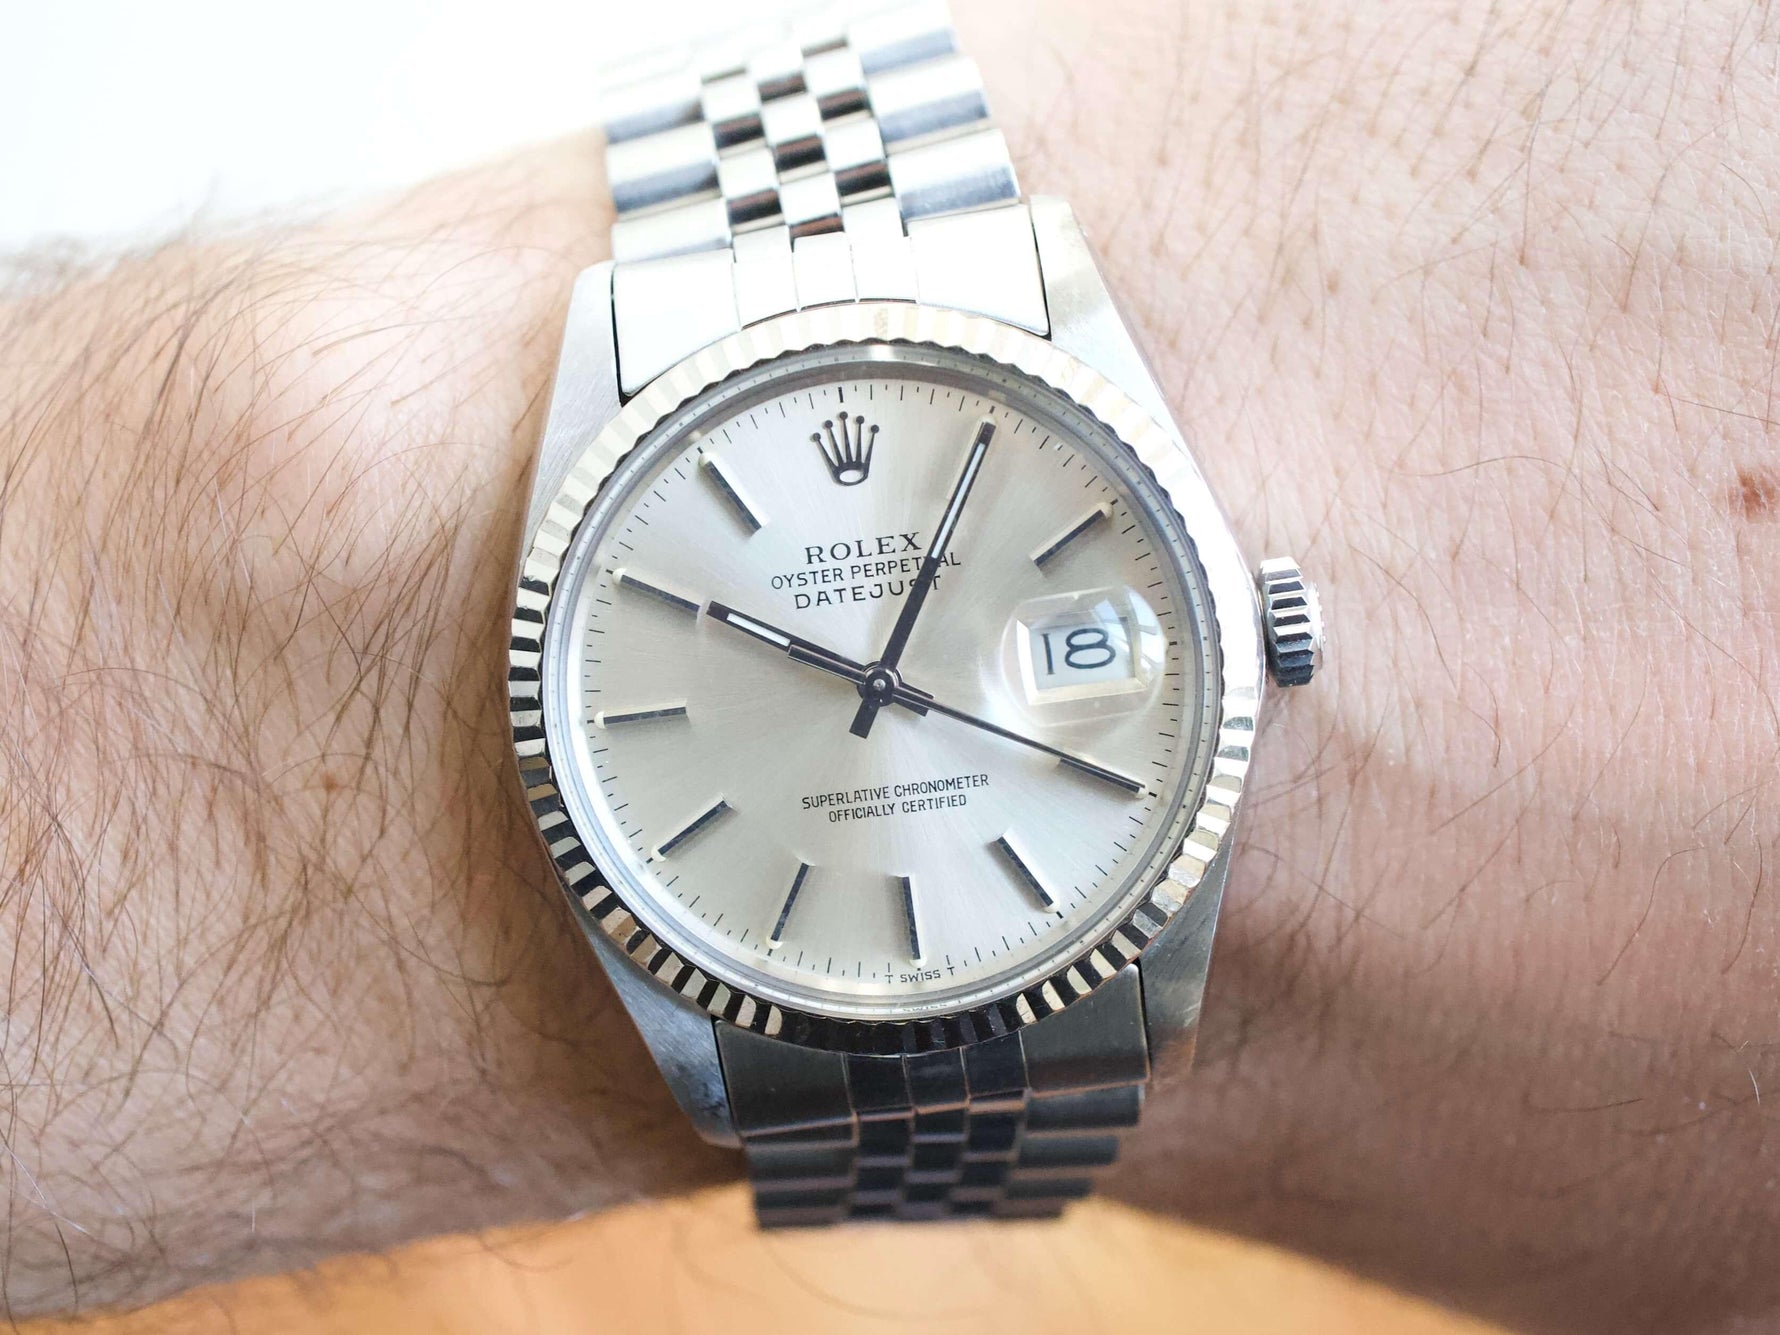 Sold Out: Rolex 16014 Datejust 36 Quickset Factory Rolex Service Box Card 18k Bezel Automatic (Serviced by Rolex in 2021) - WearingTime Luxury Watches